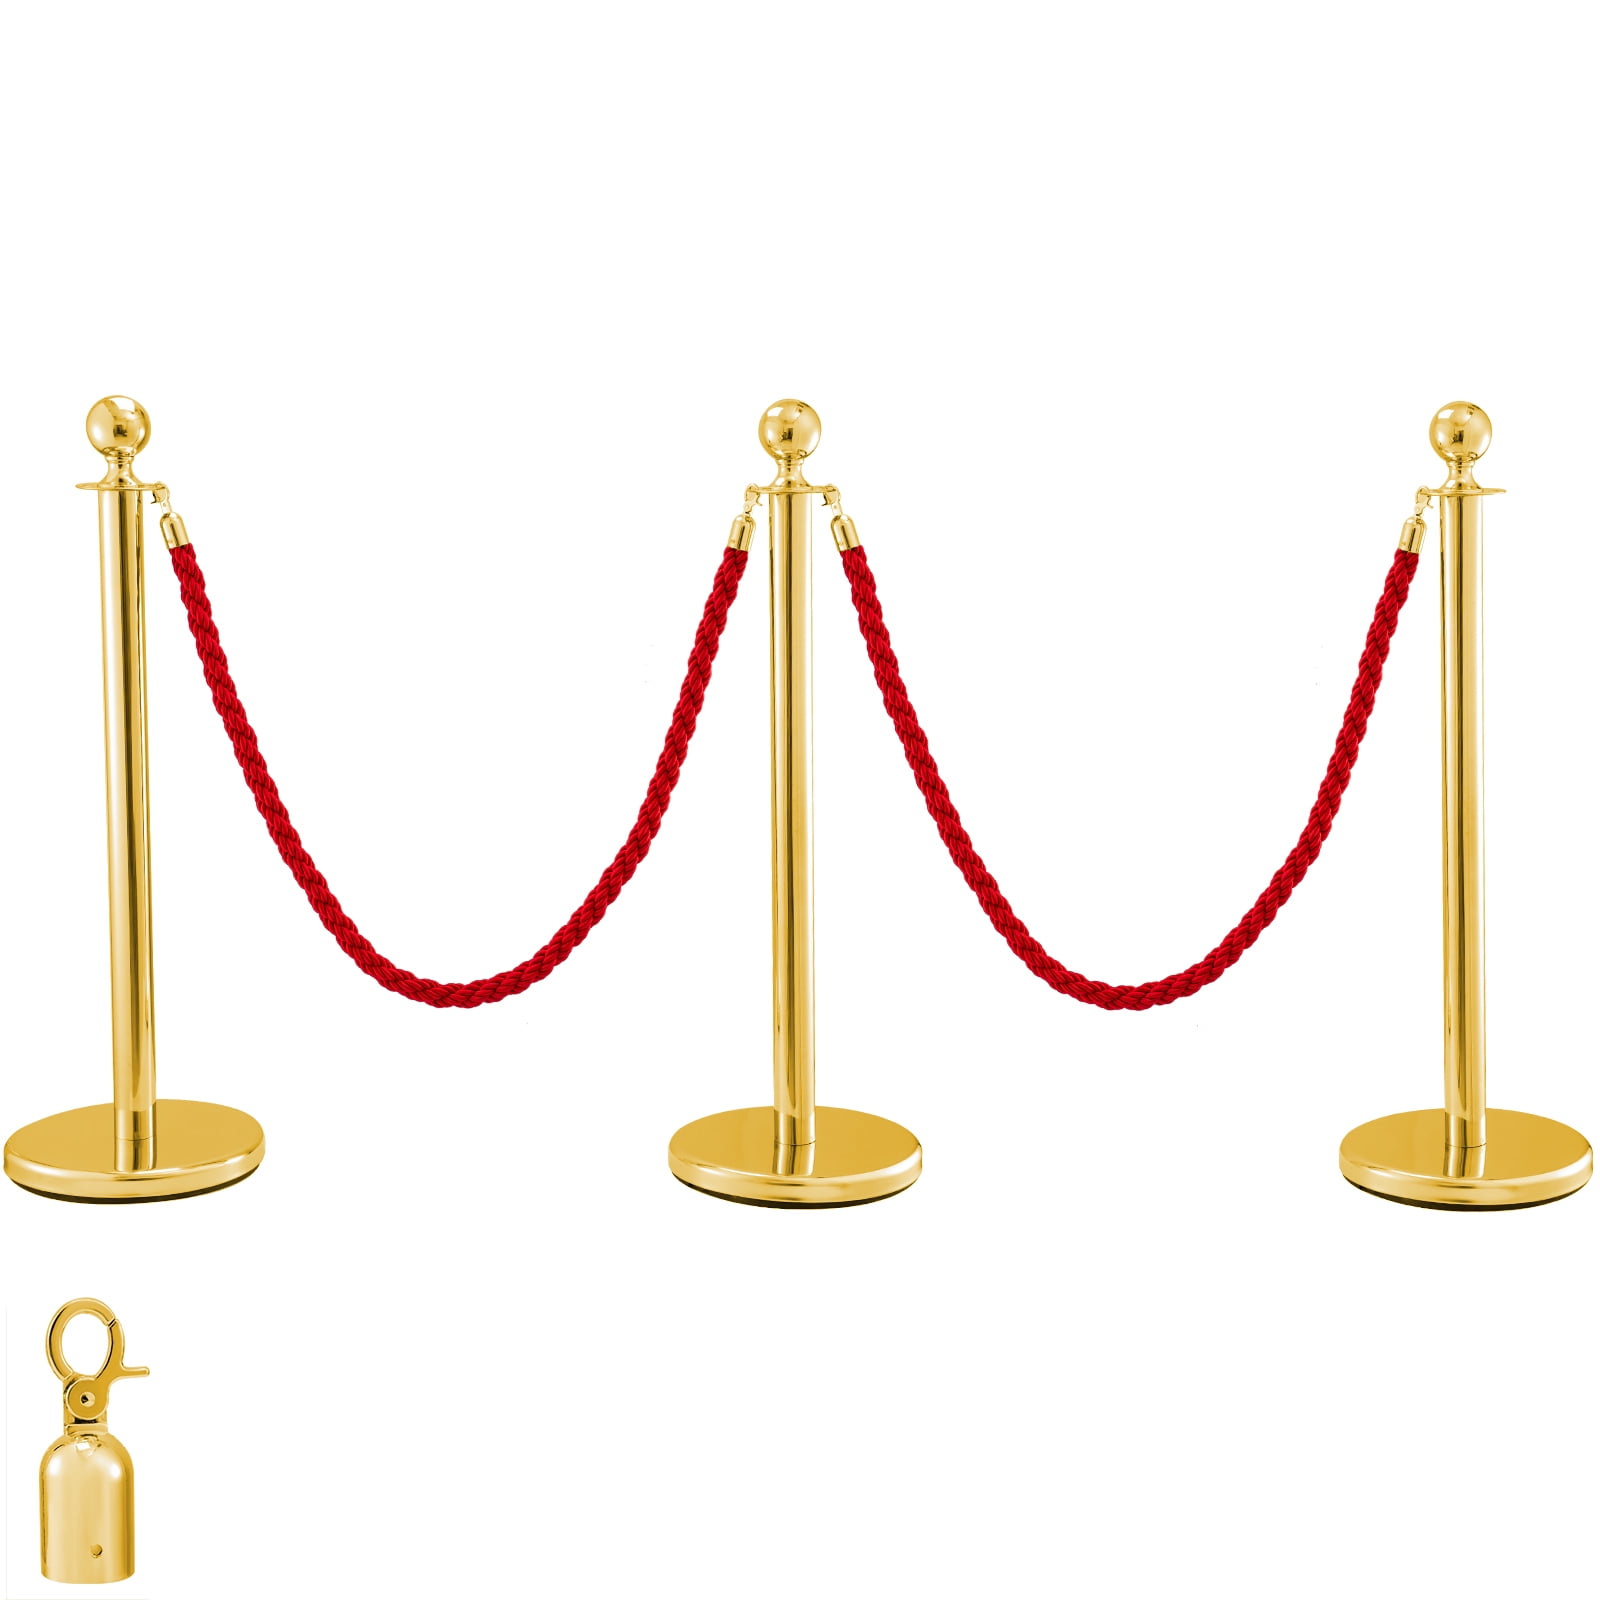 1x 1.5m Rope 1x 1.5m Rope 2x Gold/Sliver Heavy Duty Crowd Control Barrier 